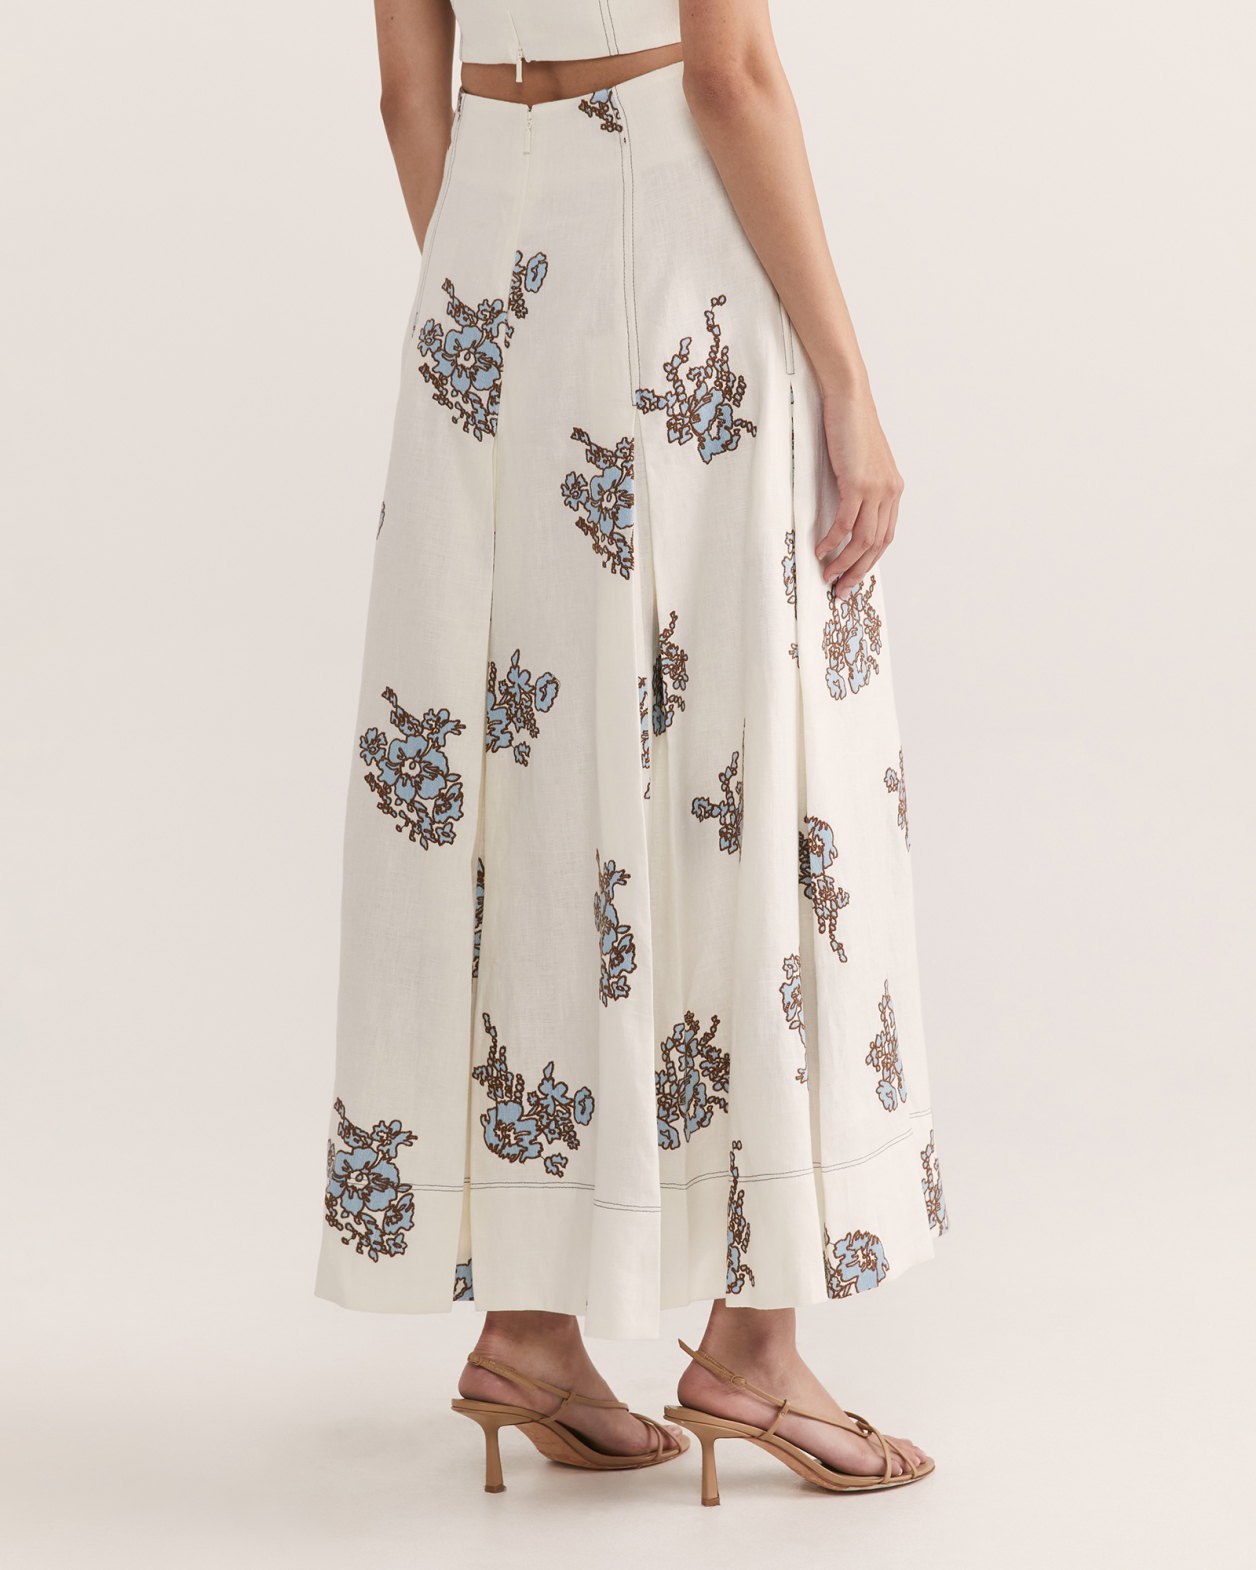 Agnes Embroidered Skirt in MULTI